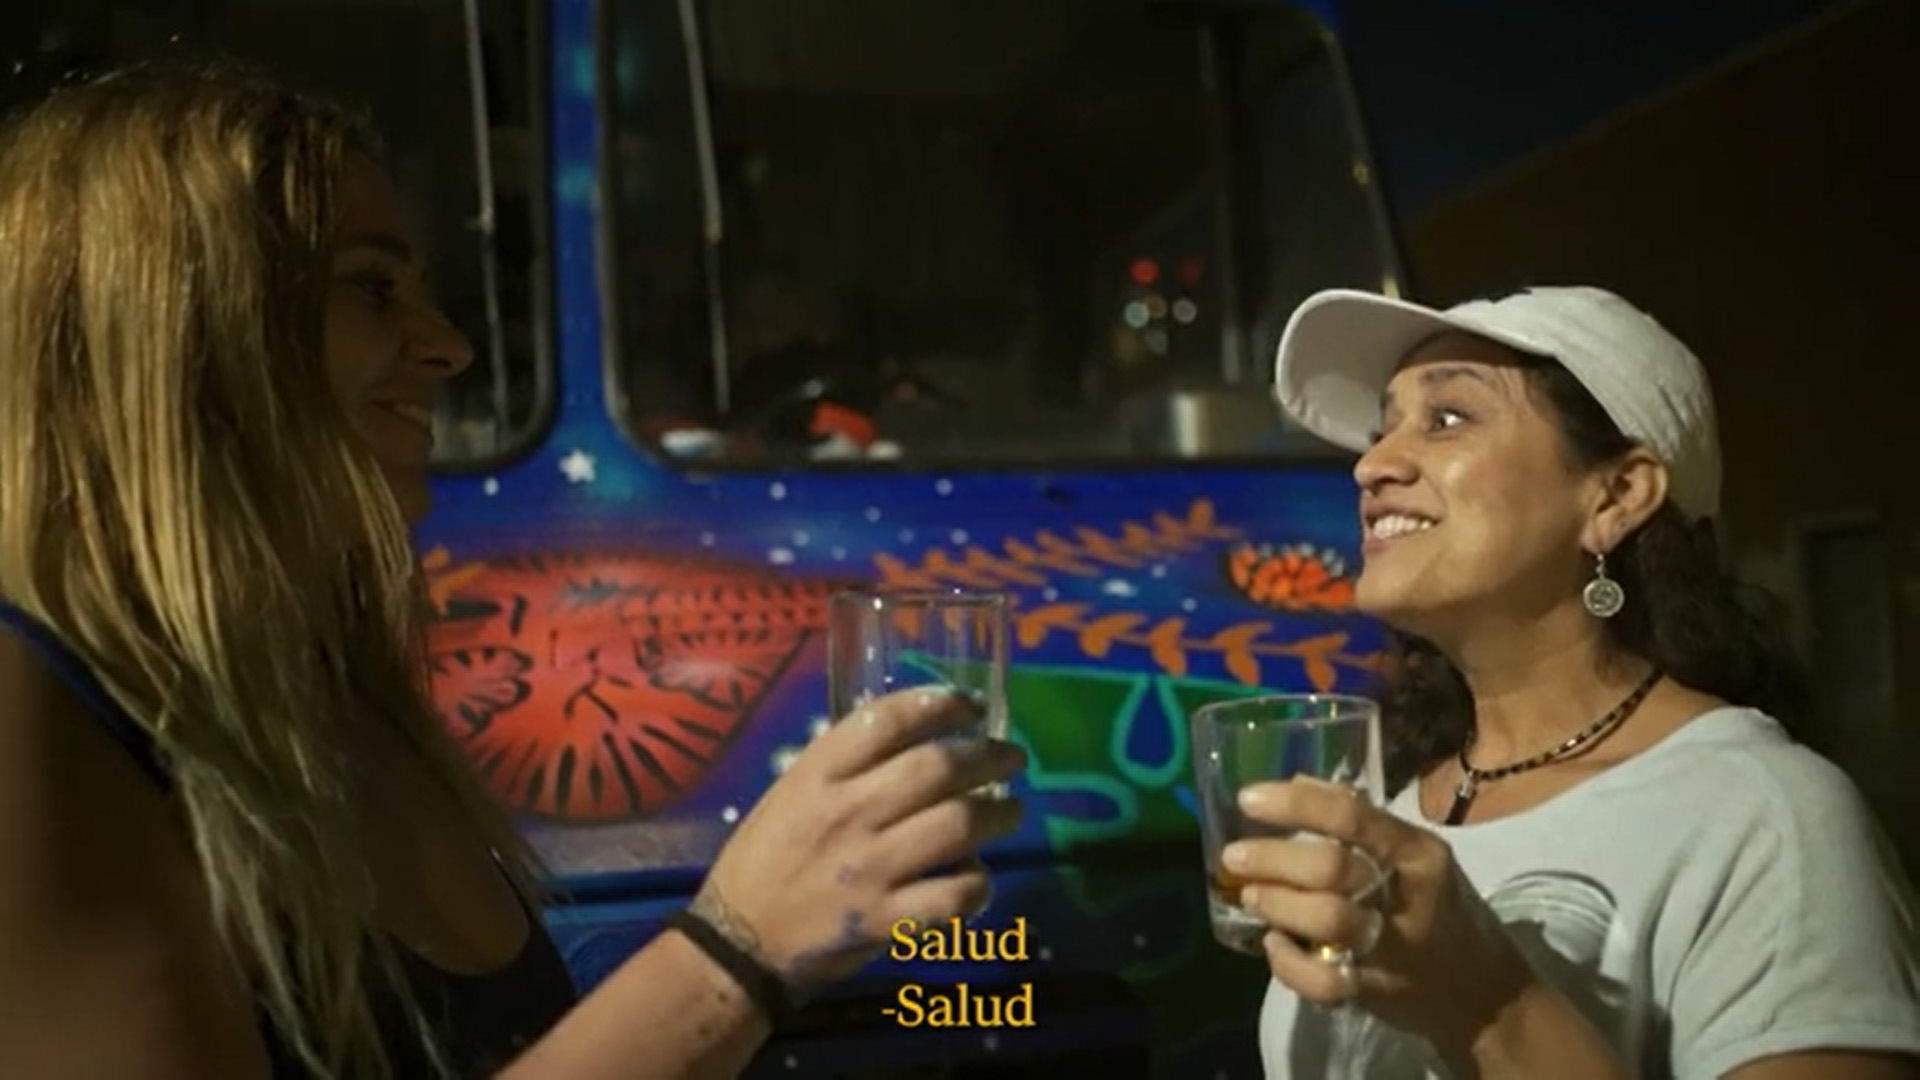 In Appreciation of Hispanic Heritage Month, DIAGEO Celebrates Local Heroes Who Use Their Craft to Uplift Their Communities as They Honor Their Heritage: Hispanic Street Food Vendors and Artists